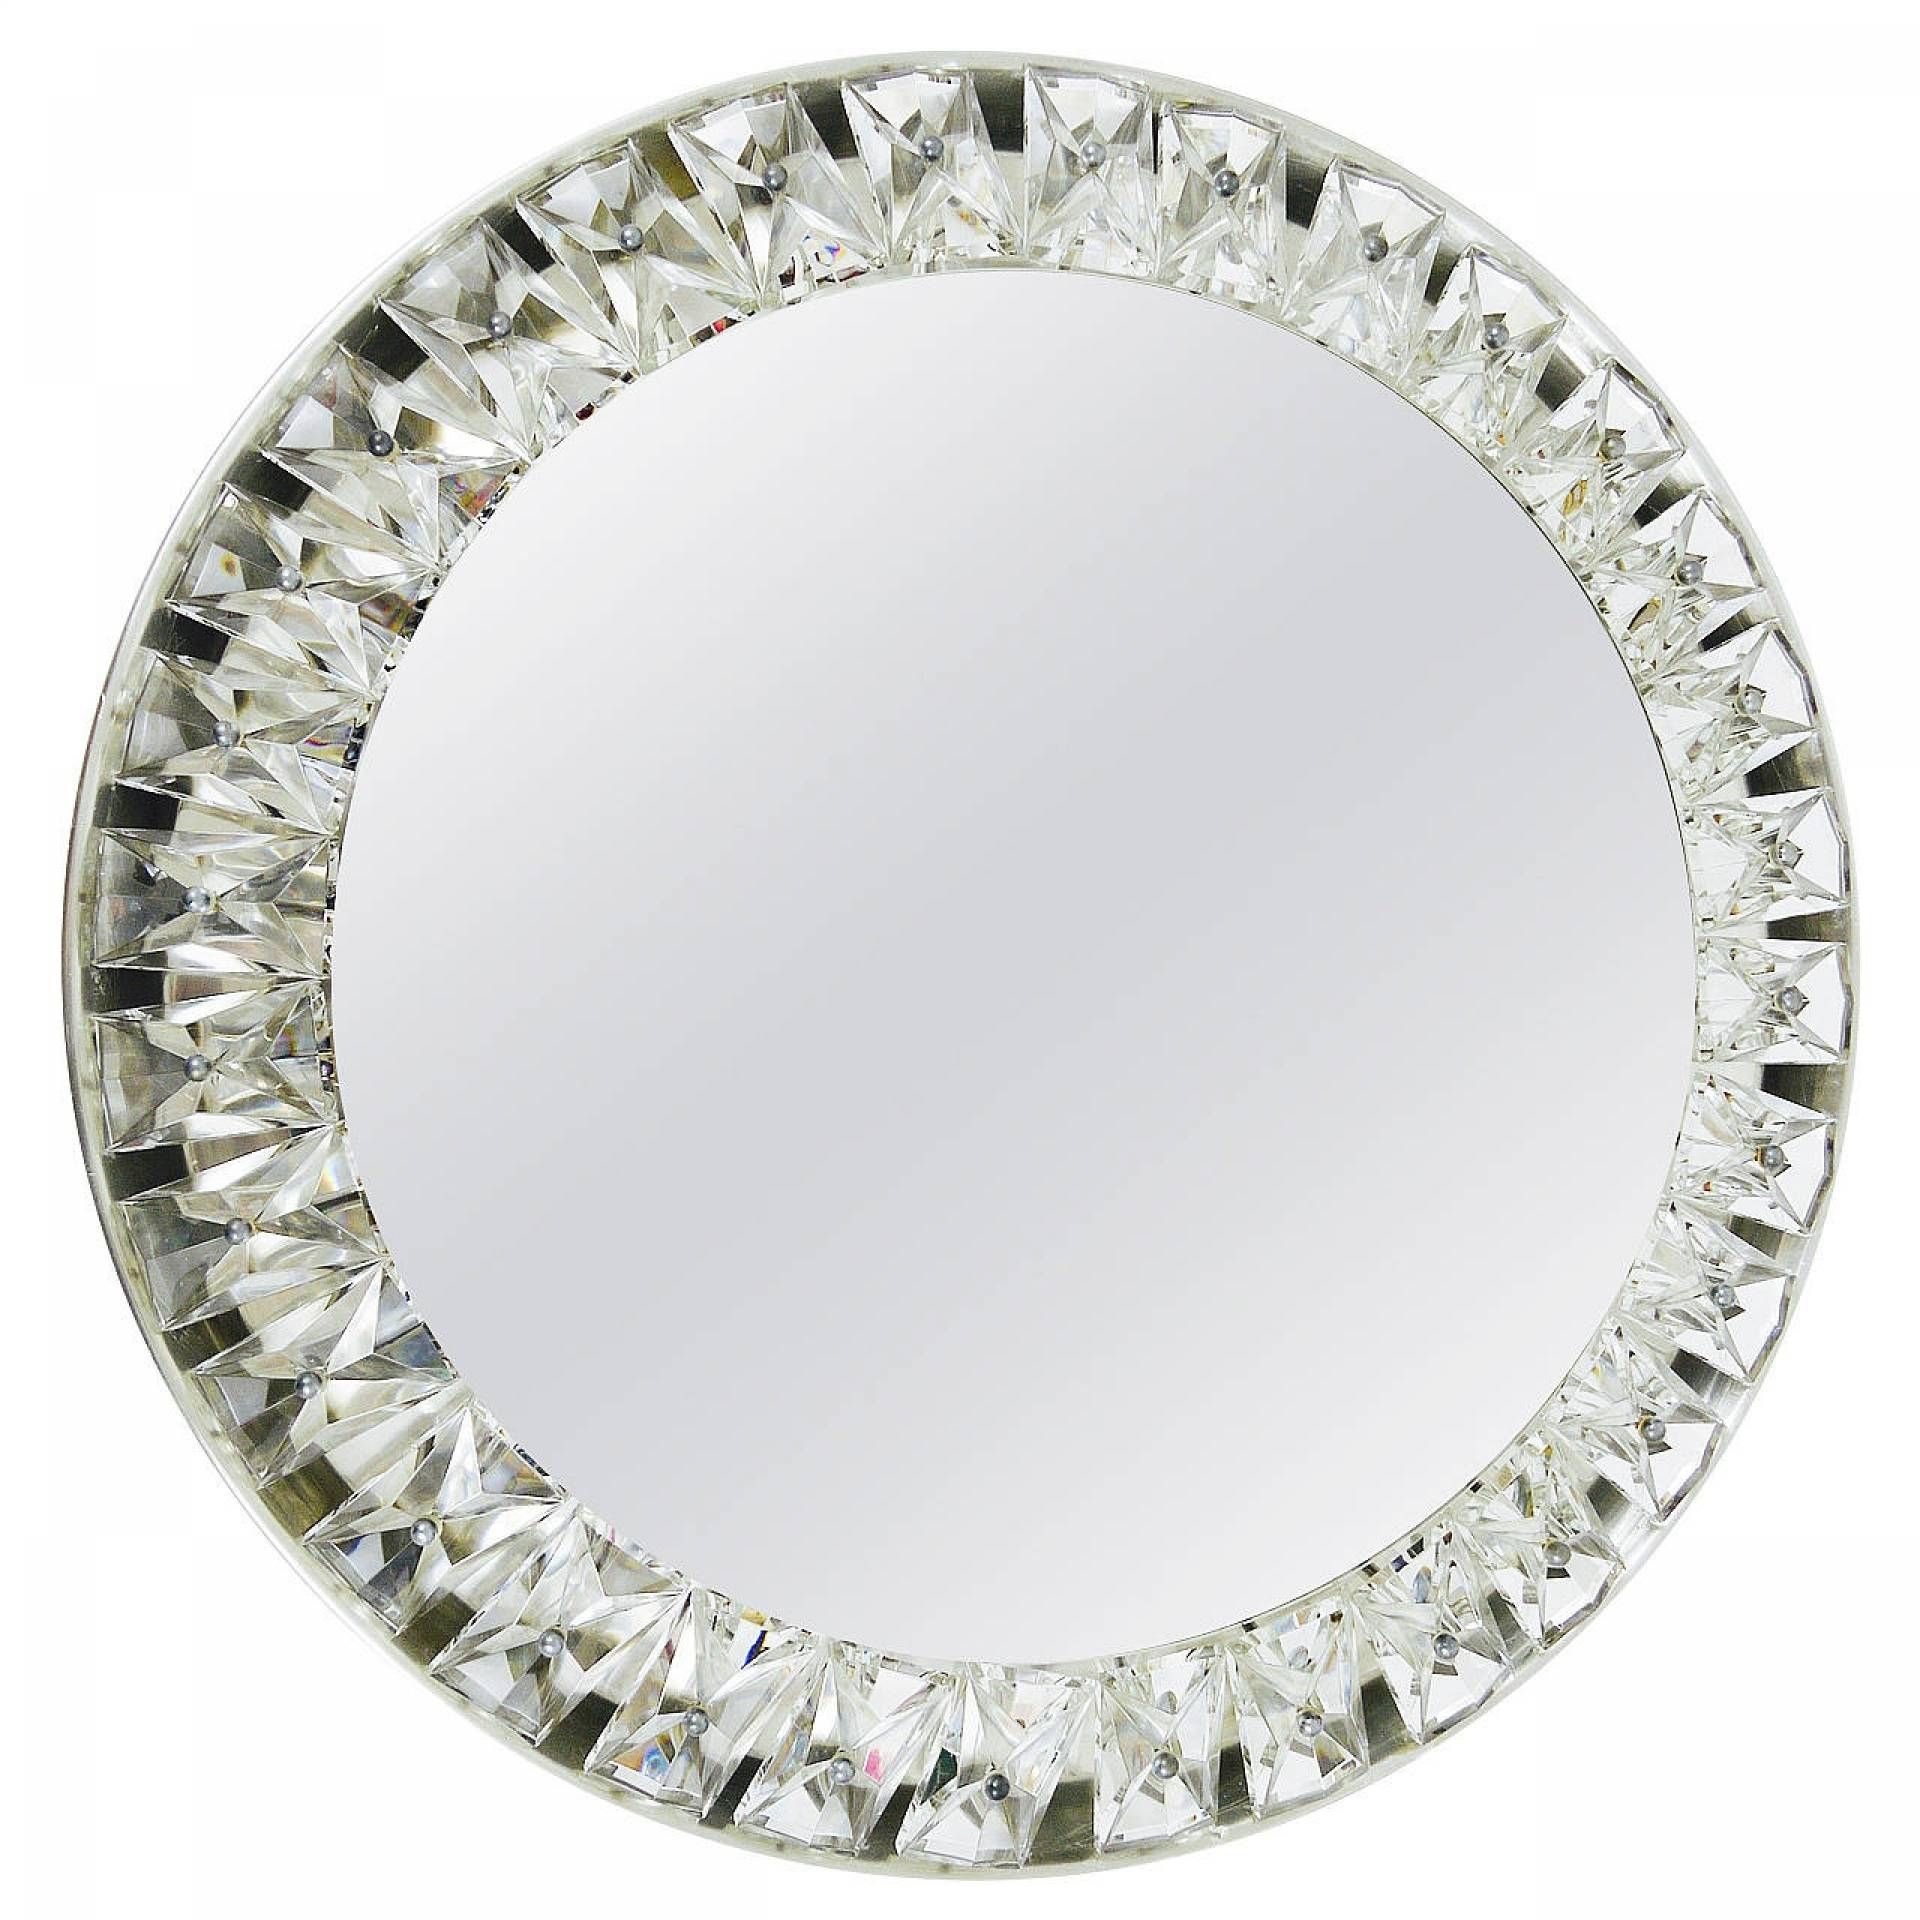 Bakalowits & Söhne: Big Round Bakalowits Backlit Wall Mirror With Inside Wall Mirrors With Crystals (View 8 of 25)